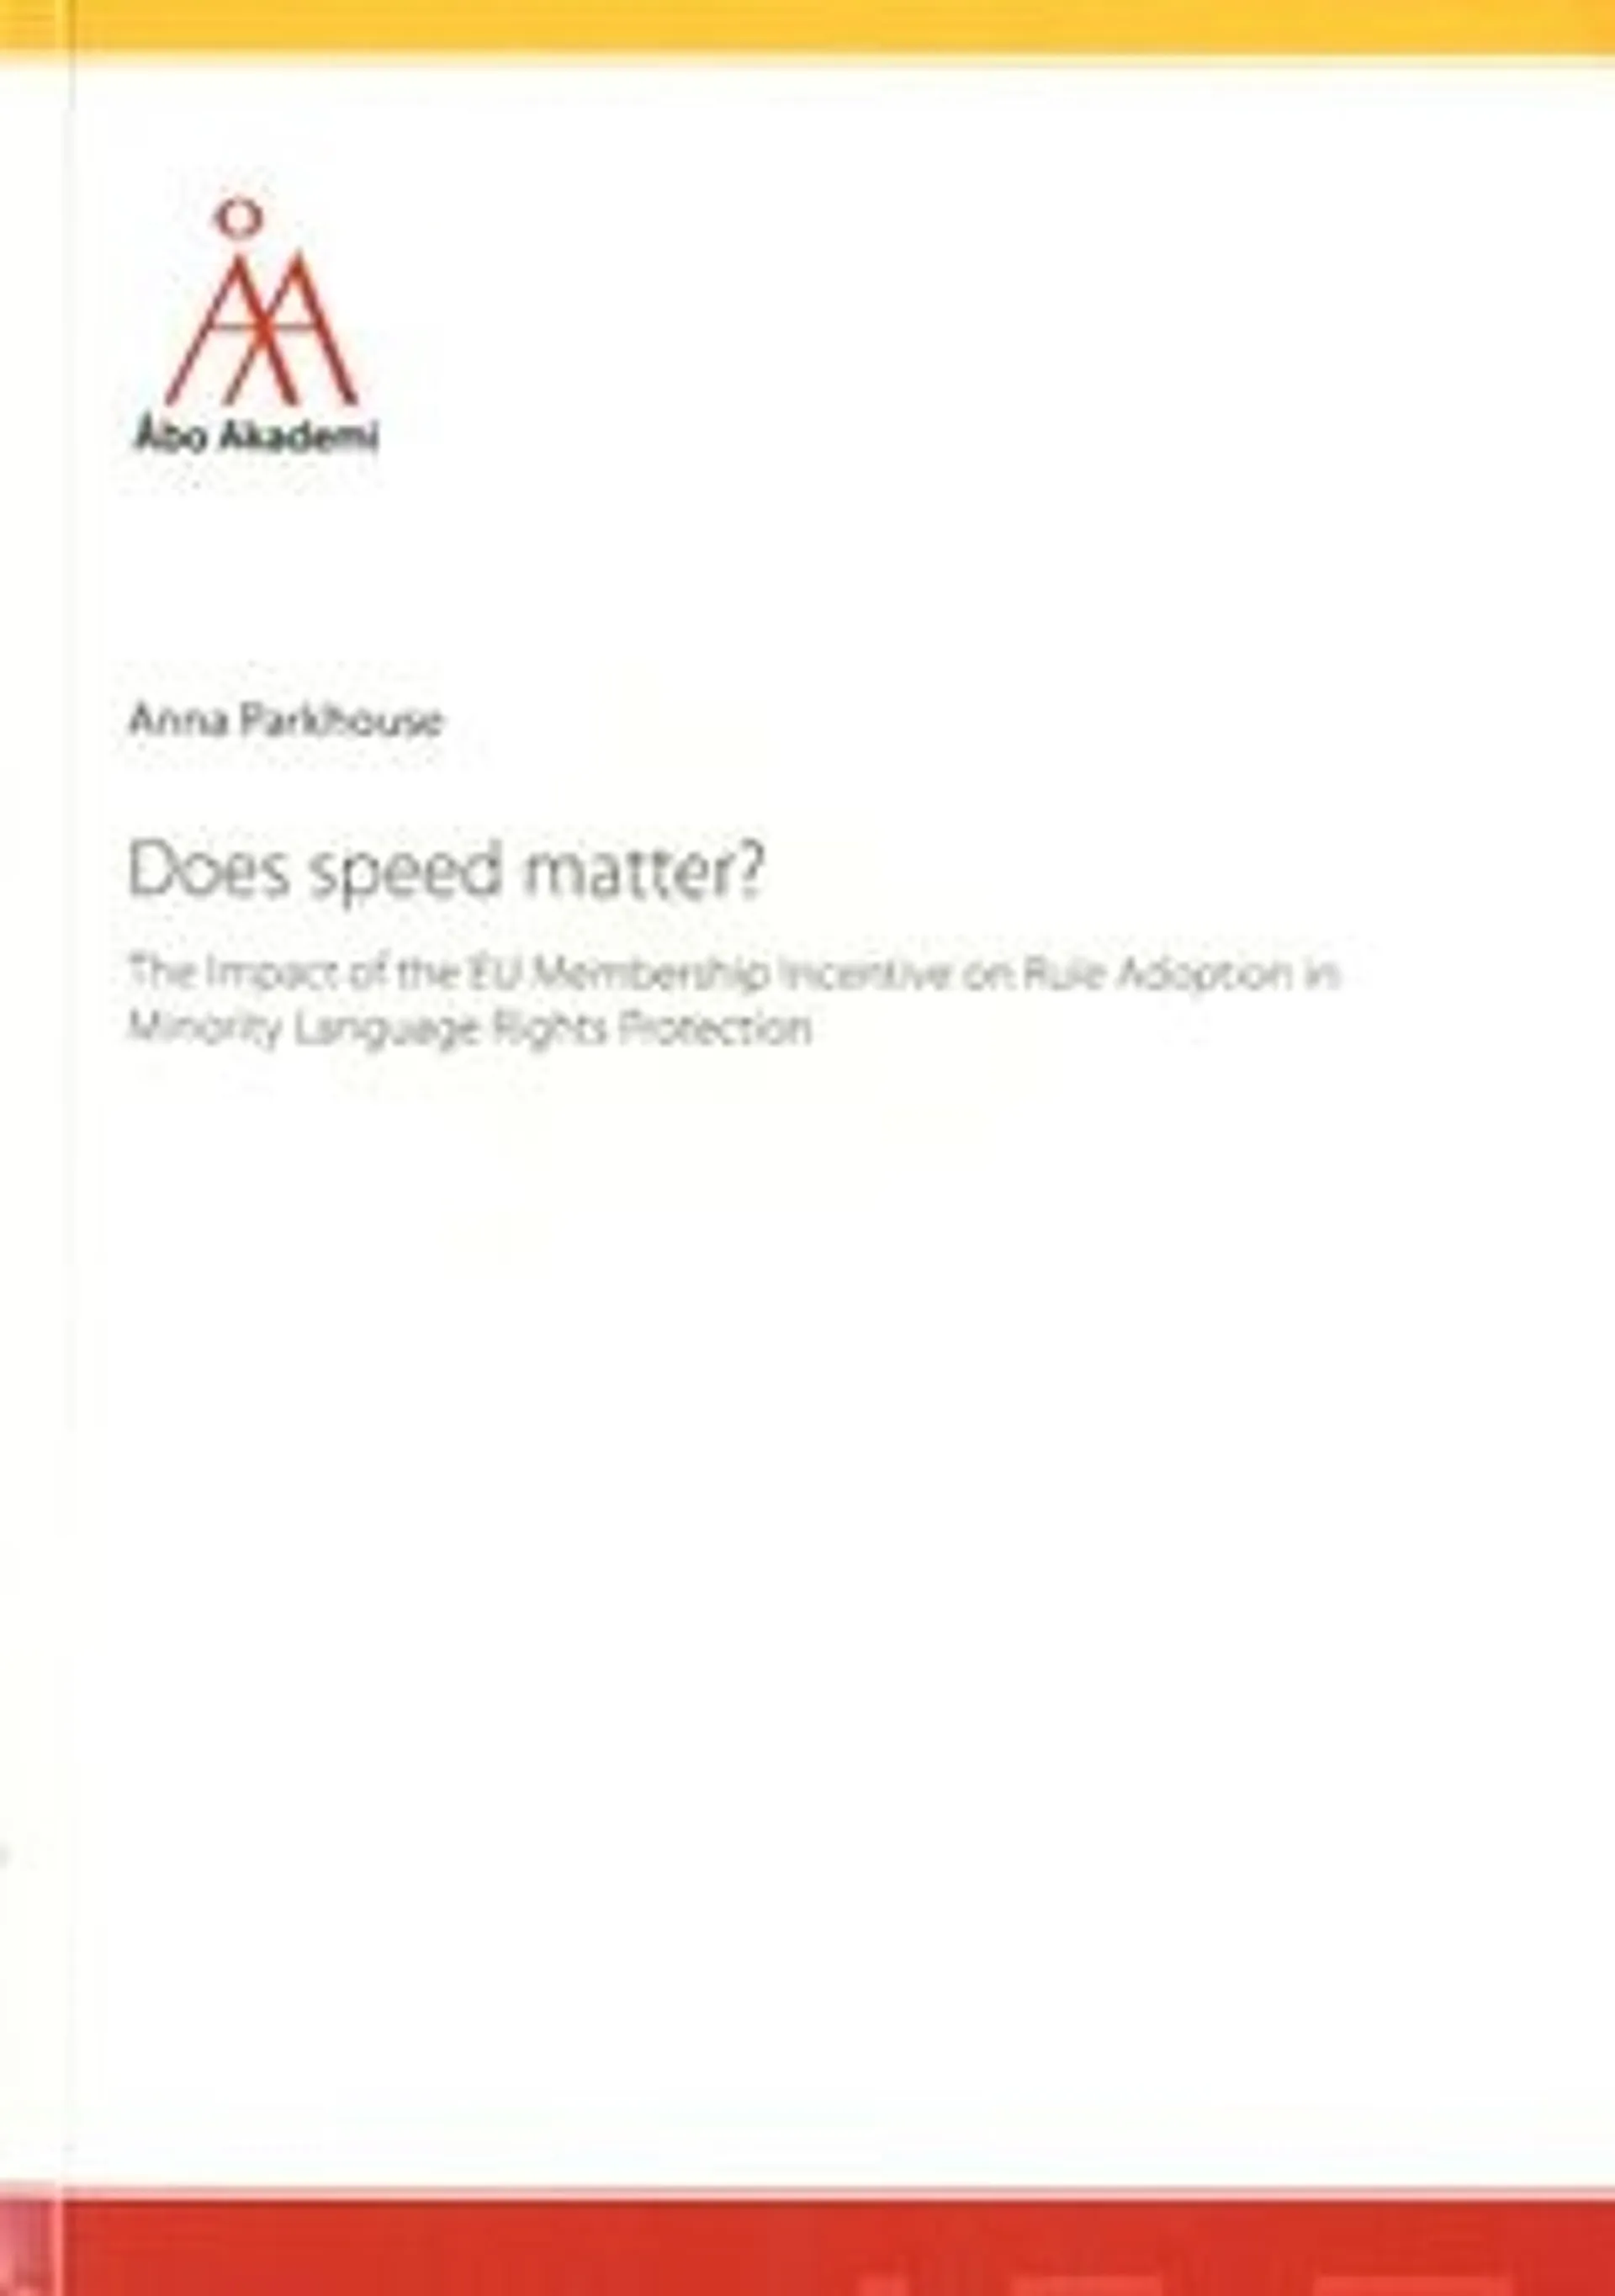 Parkhouse, Does speed matter?